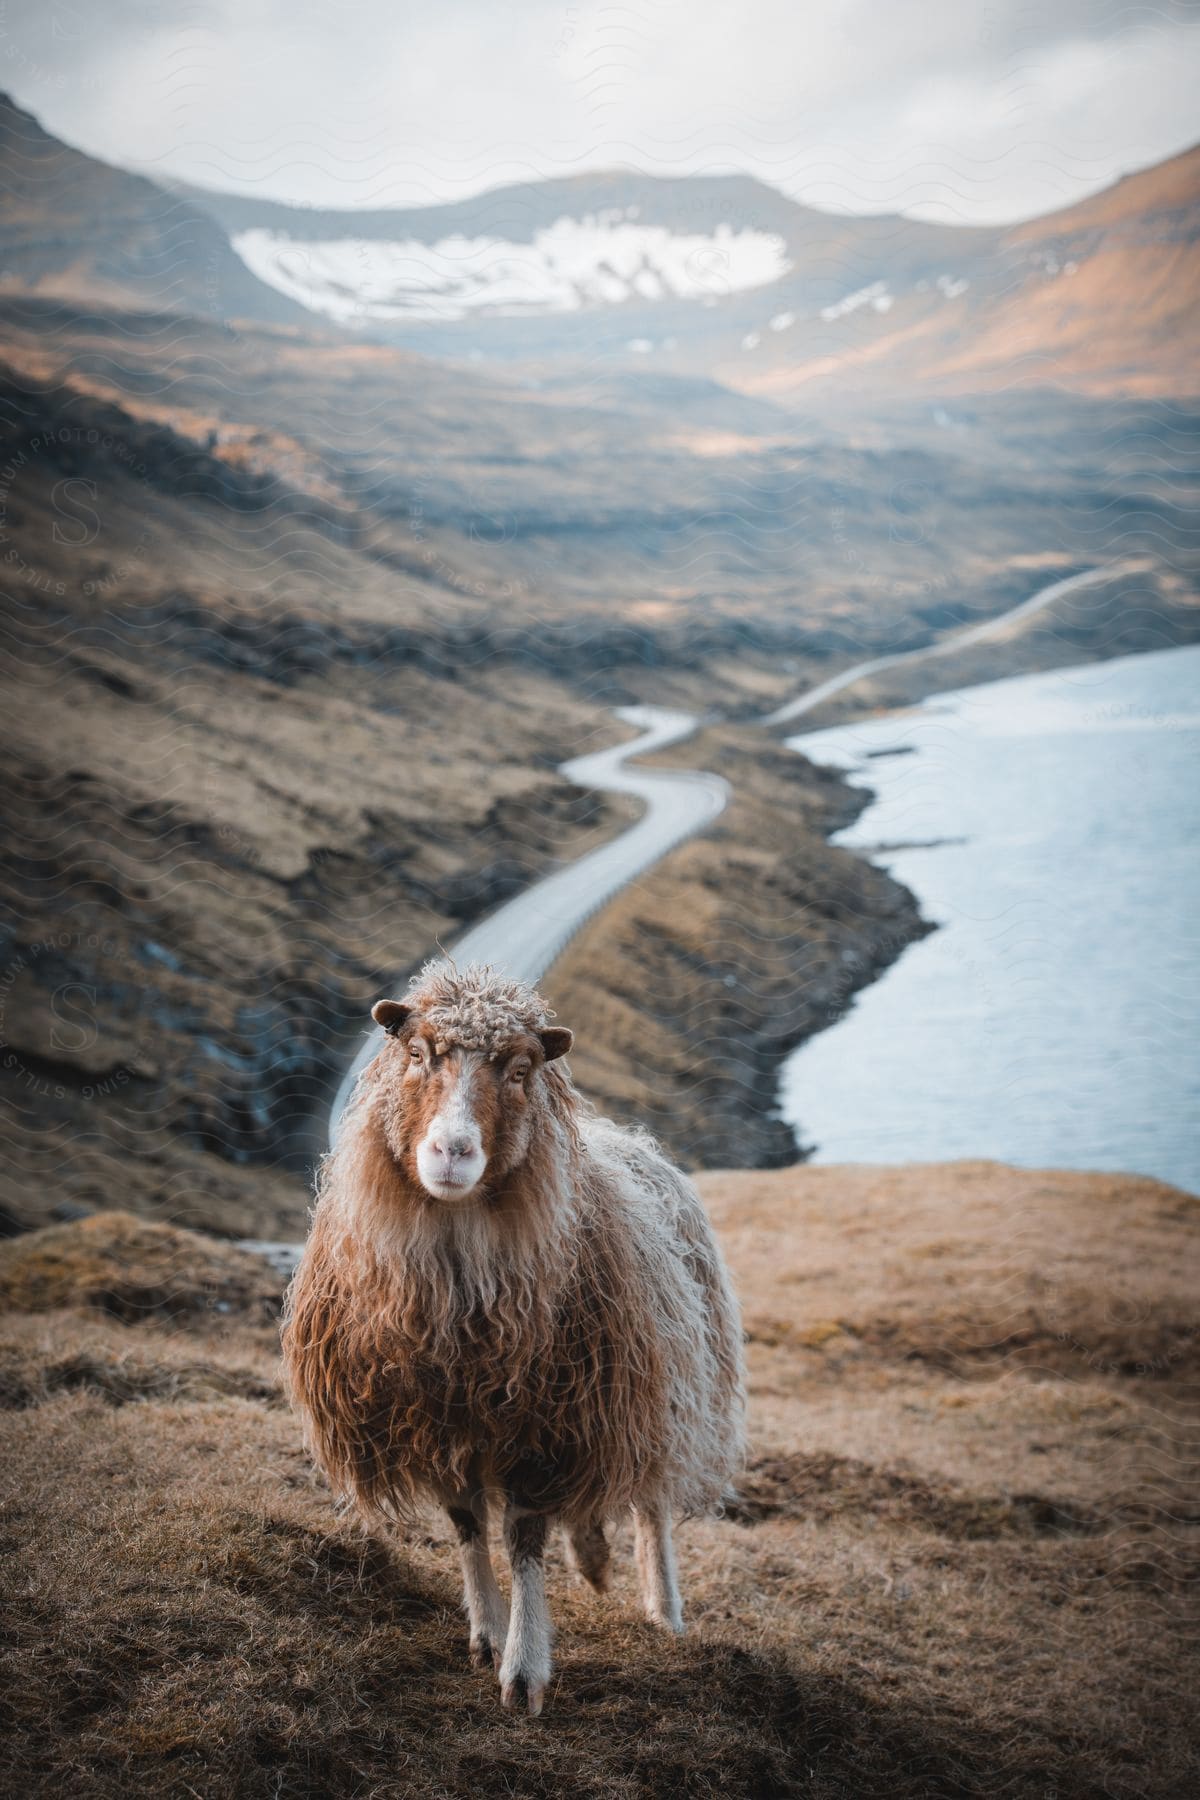 A mountain goat stands in front of a road a lake and a mountain range